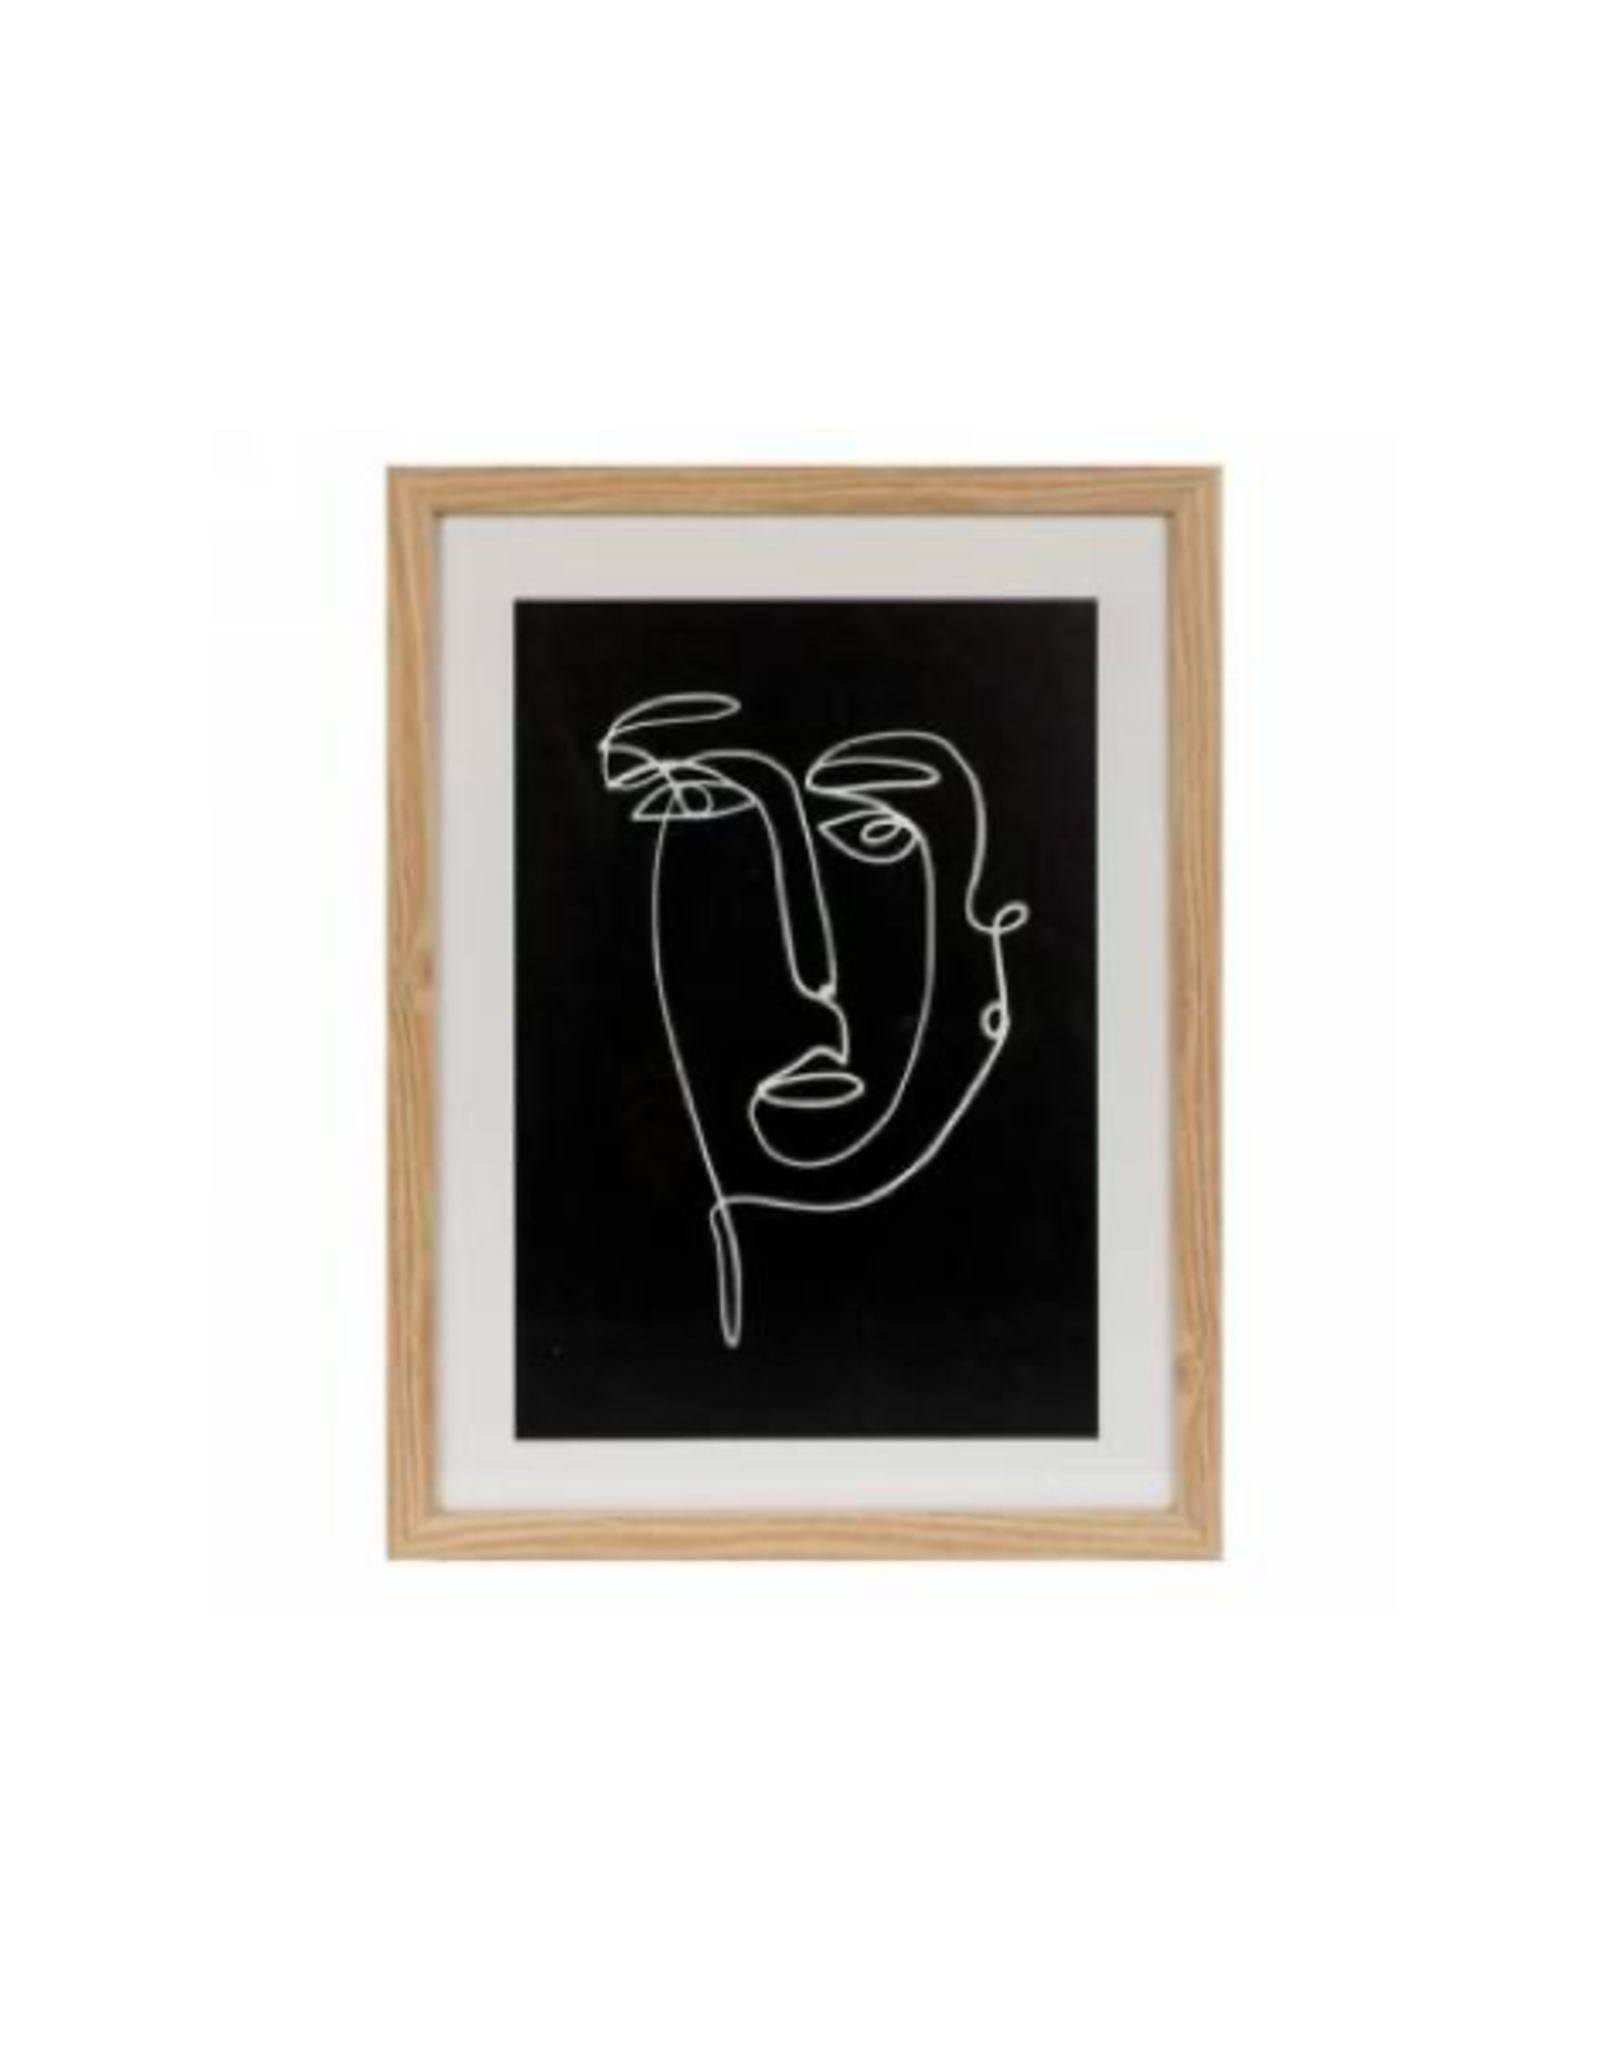 TIMCo AES - Framed Art / Abstract Portrait, 13 x 17"